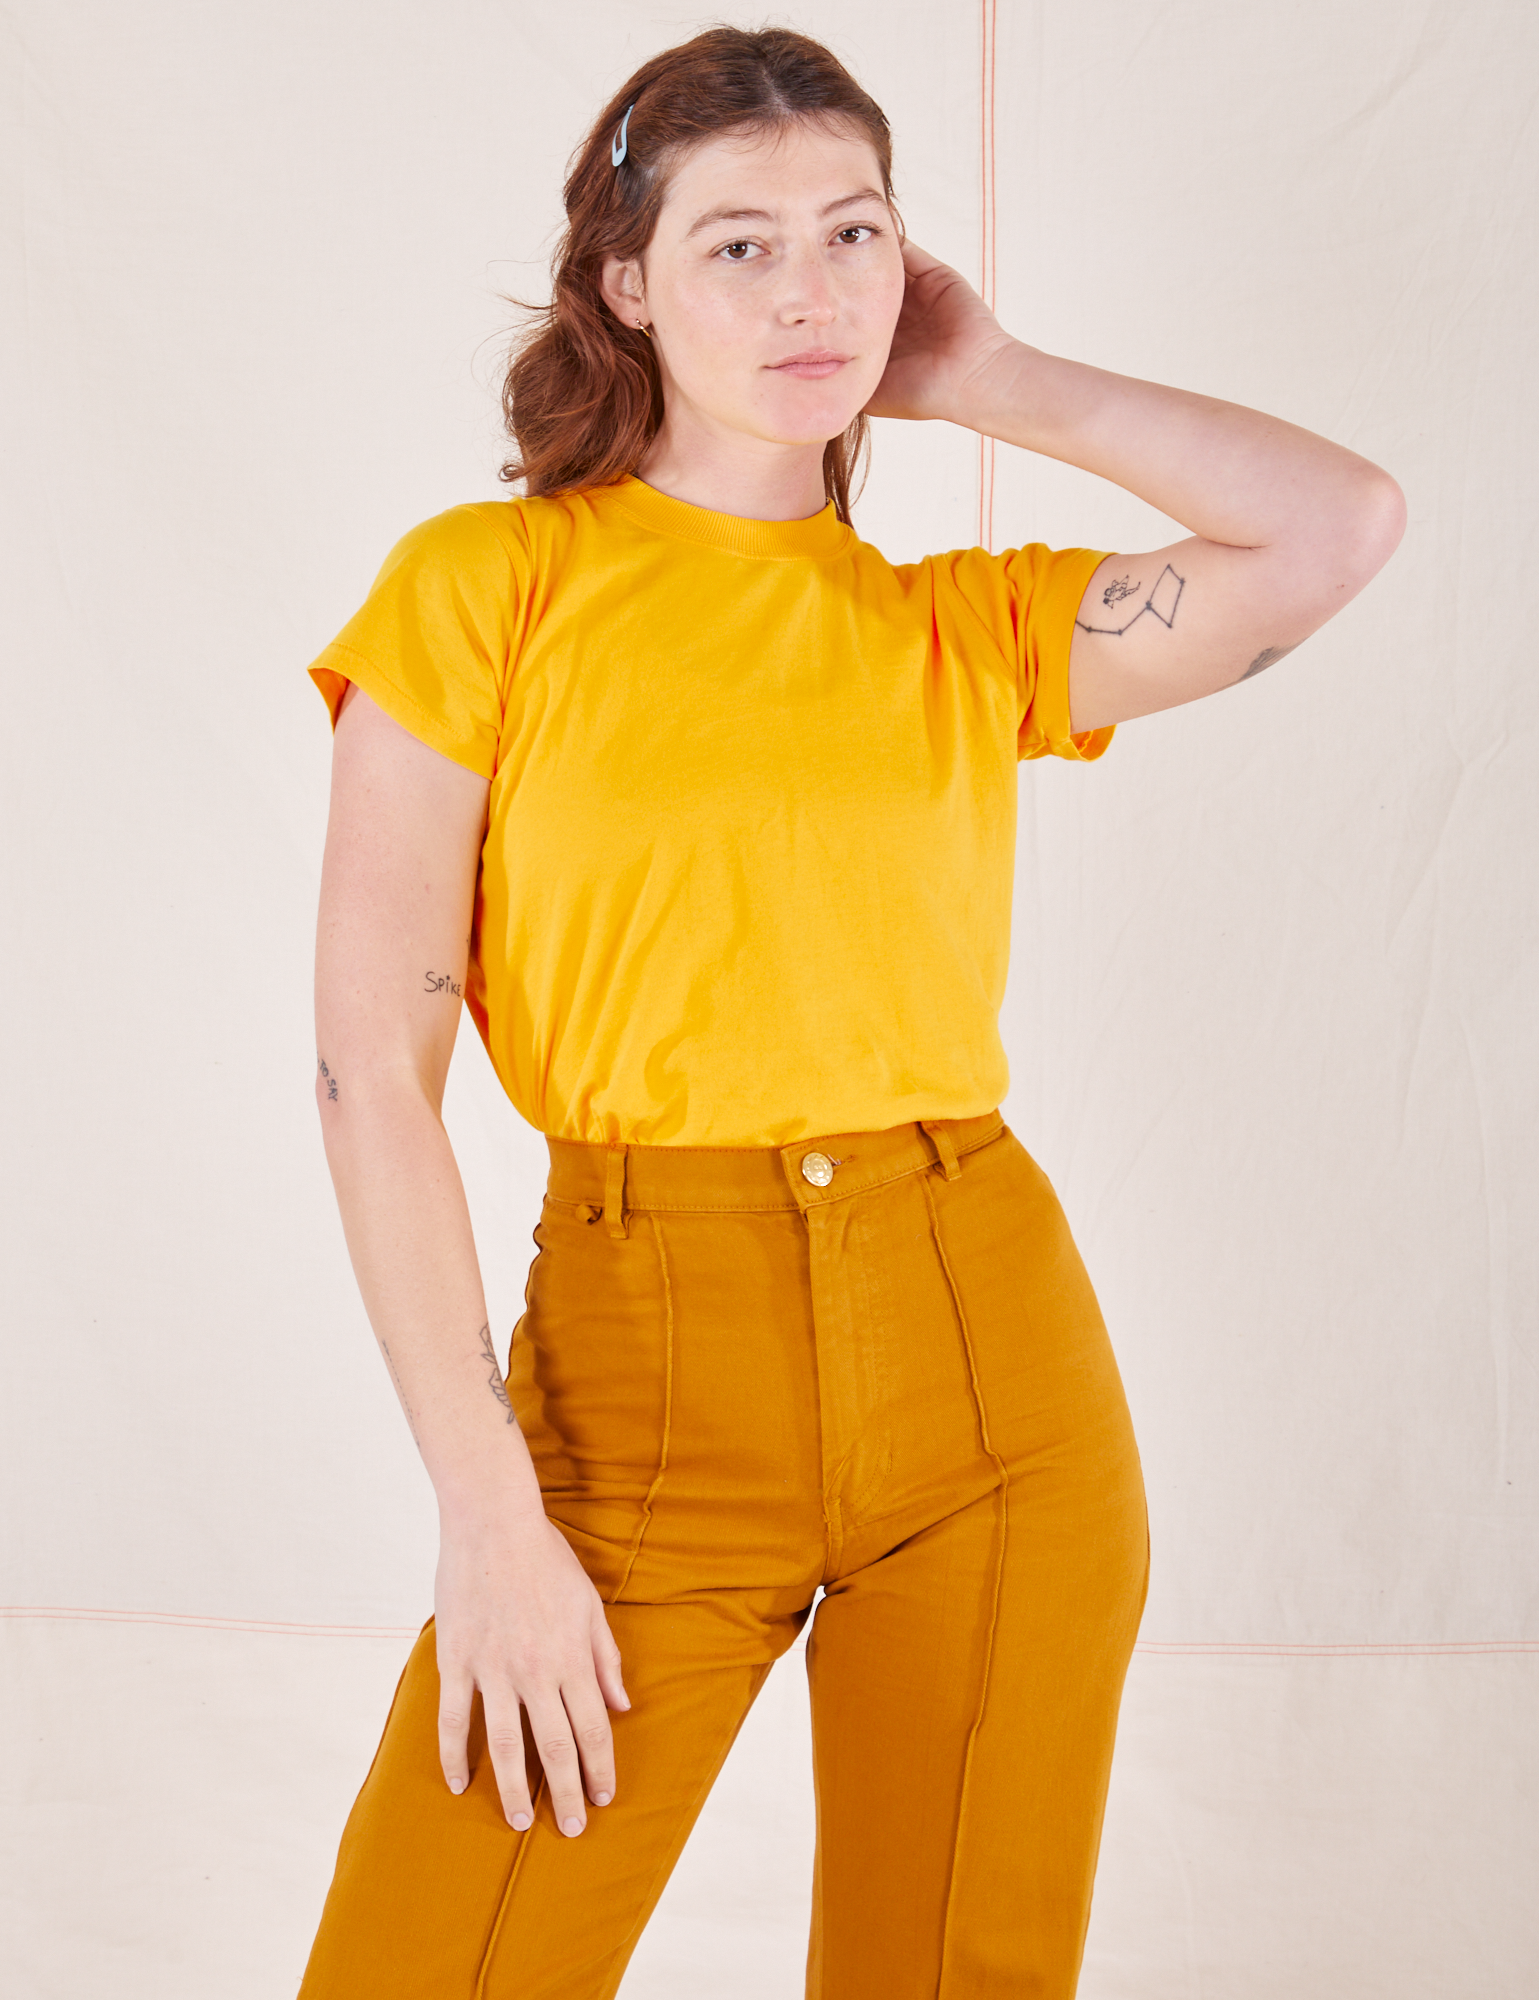 Alex is wearing P Organic Vintage Tee in Sunshine Yellow paired with spicy mustard Western Pants